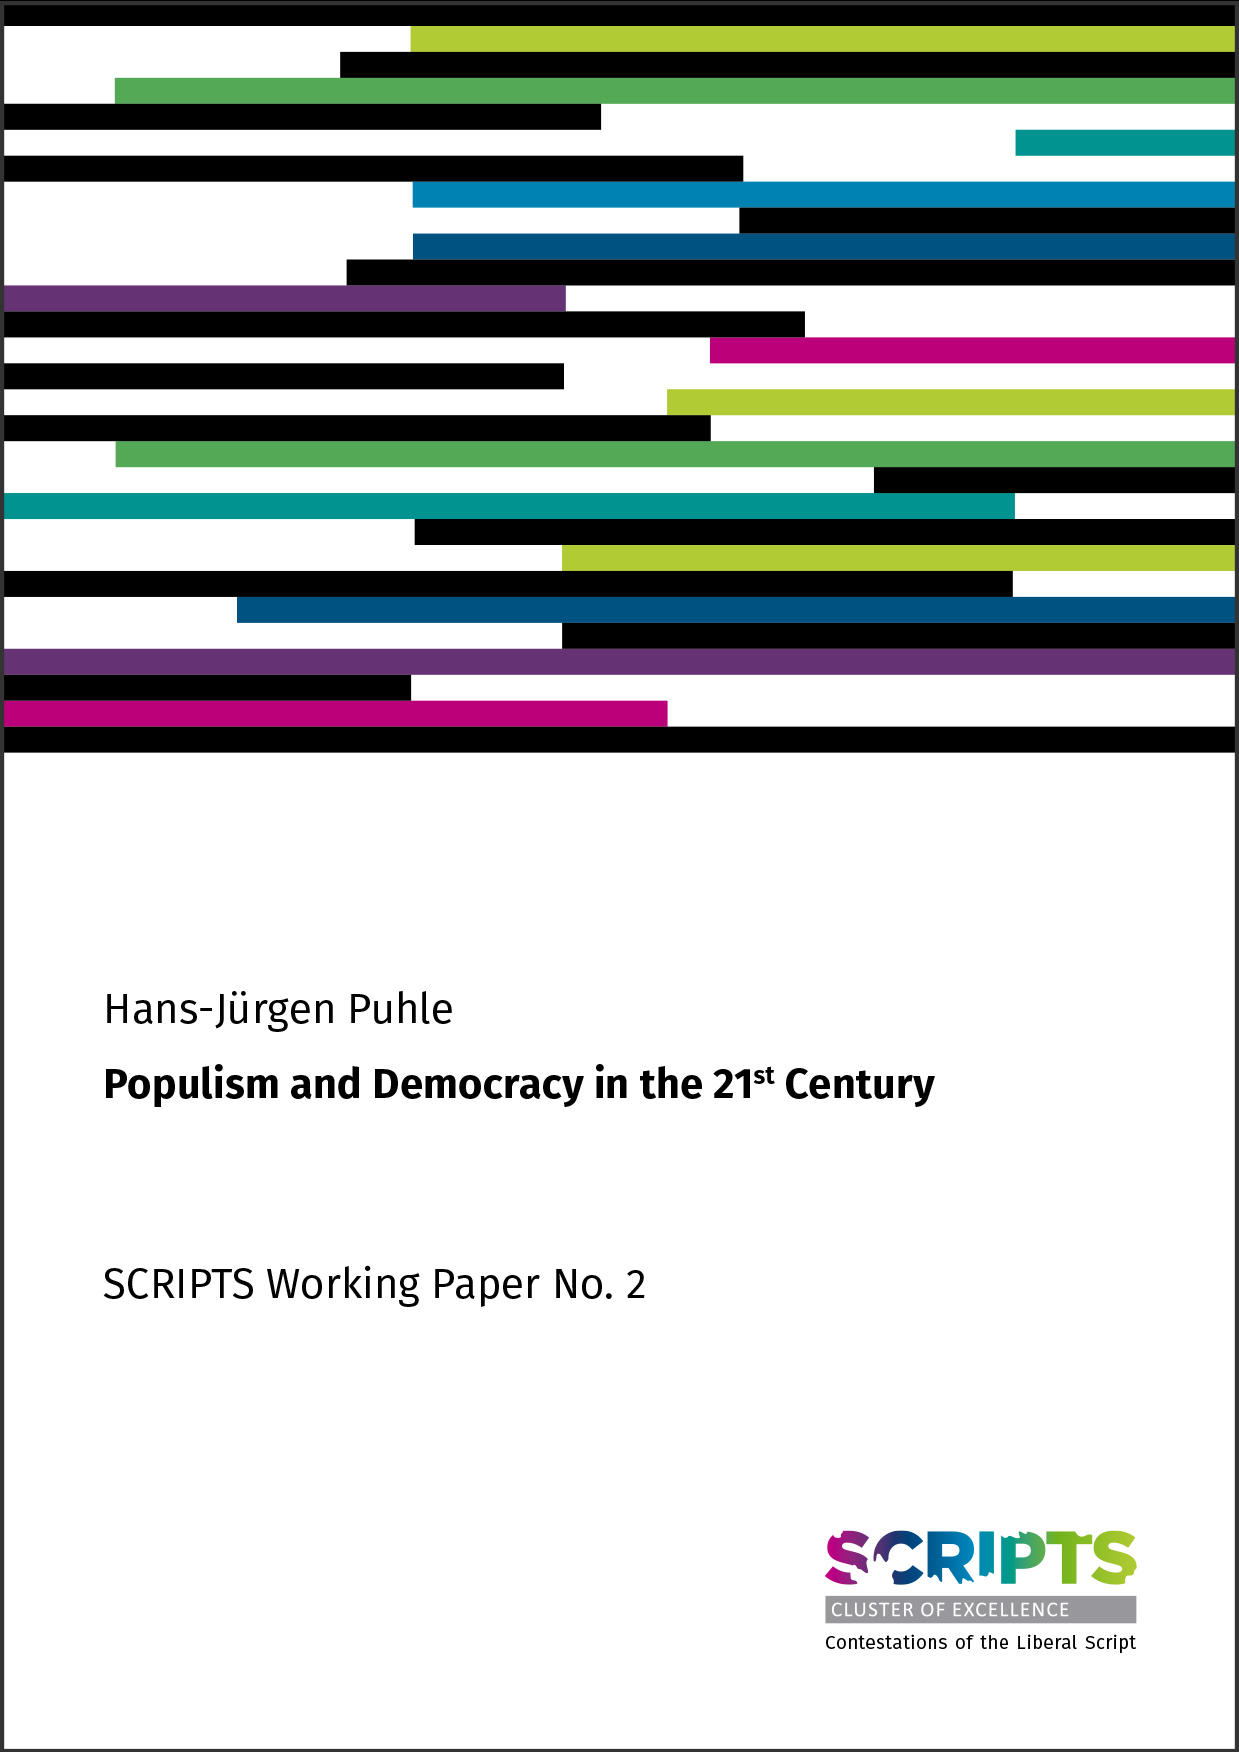 SCRIPTS_Working_Paper_2_Cover